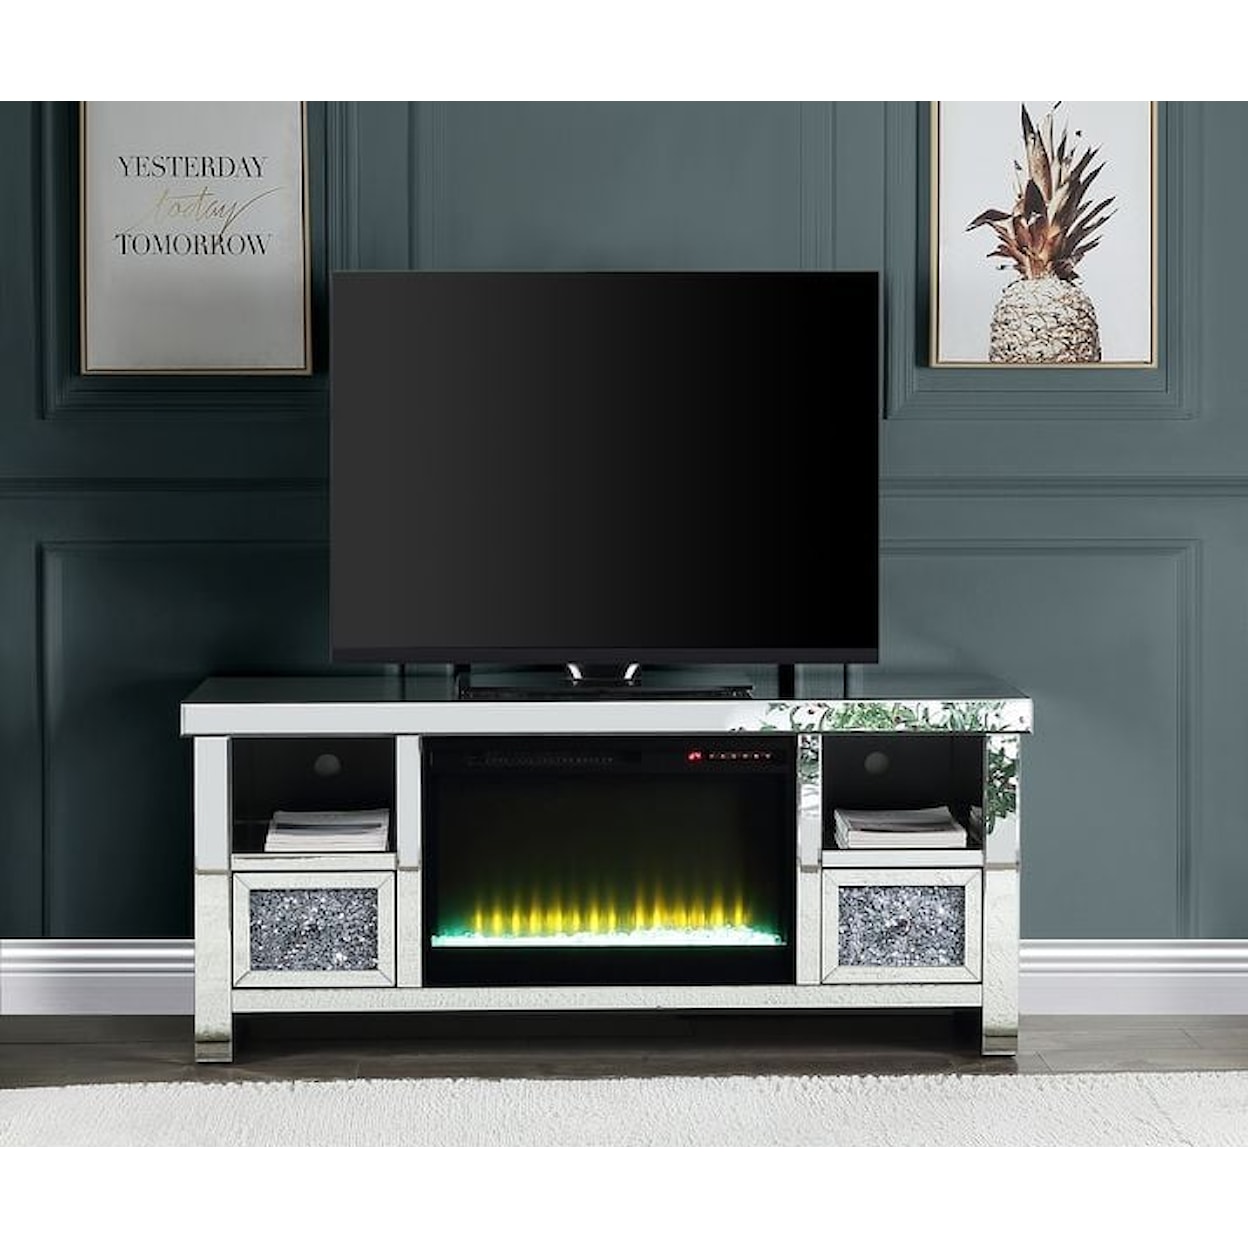 Acme Furniture Noralie RENO BLING TV STAND FIREPLACE |